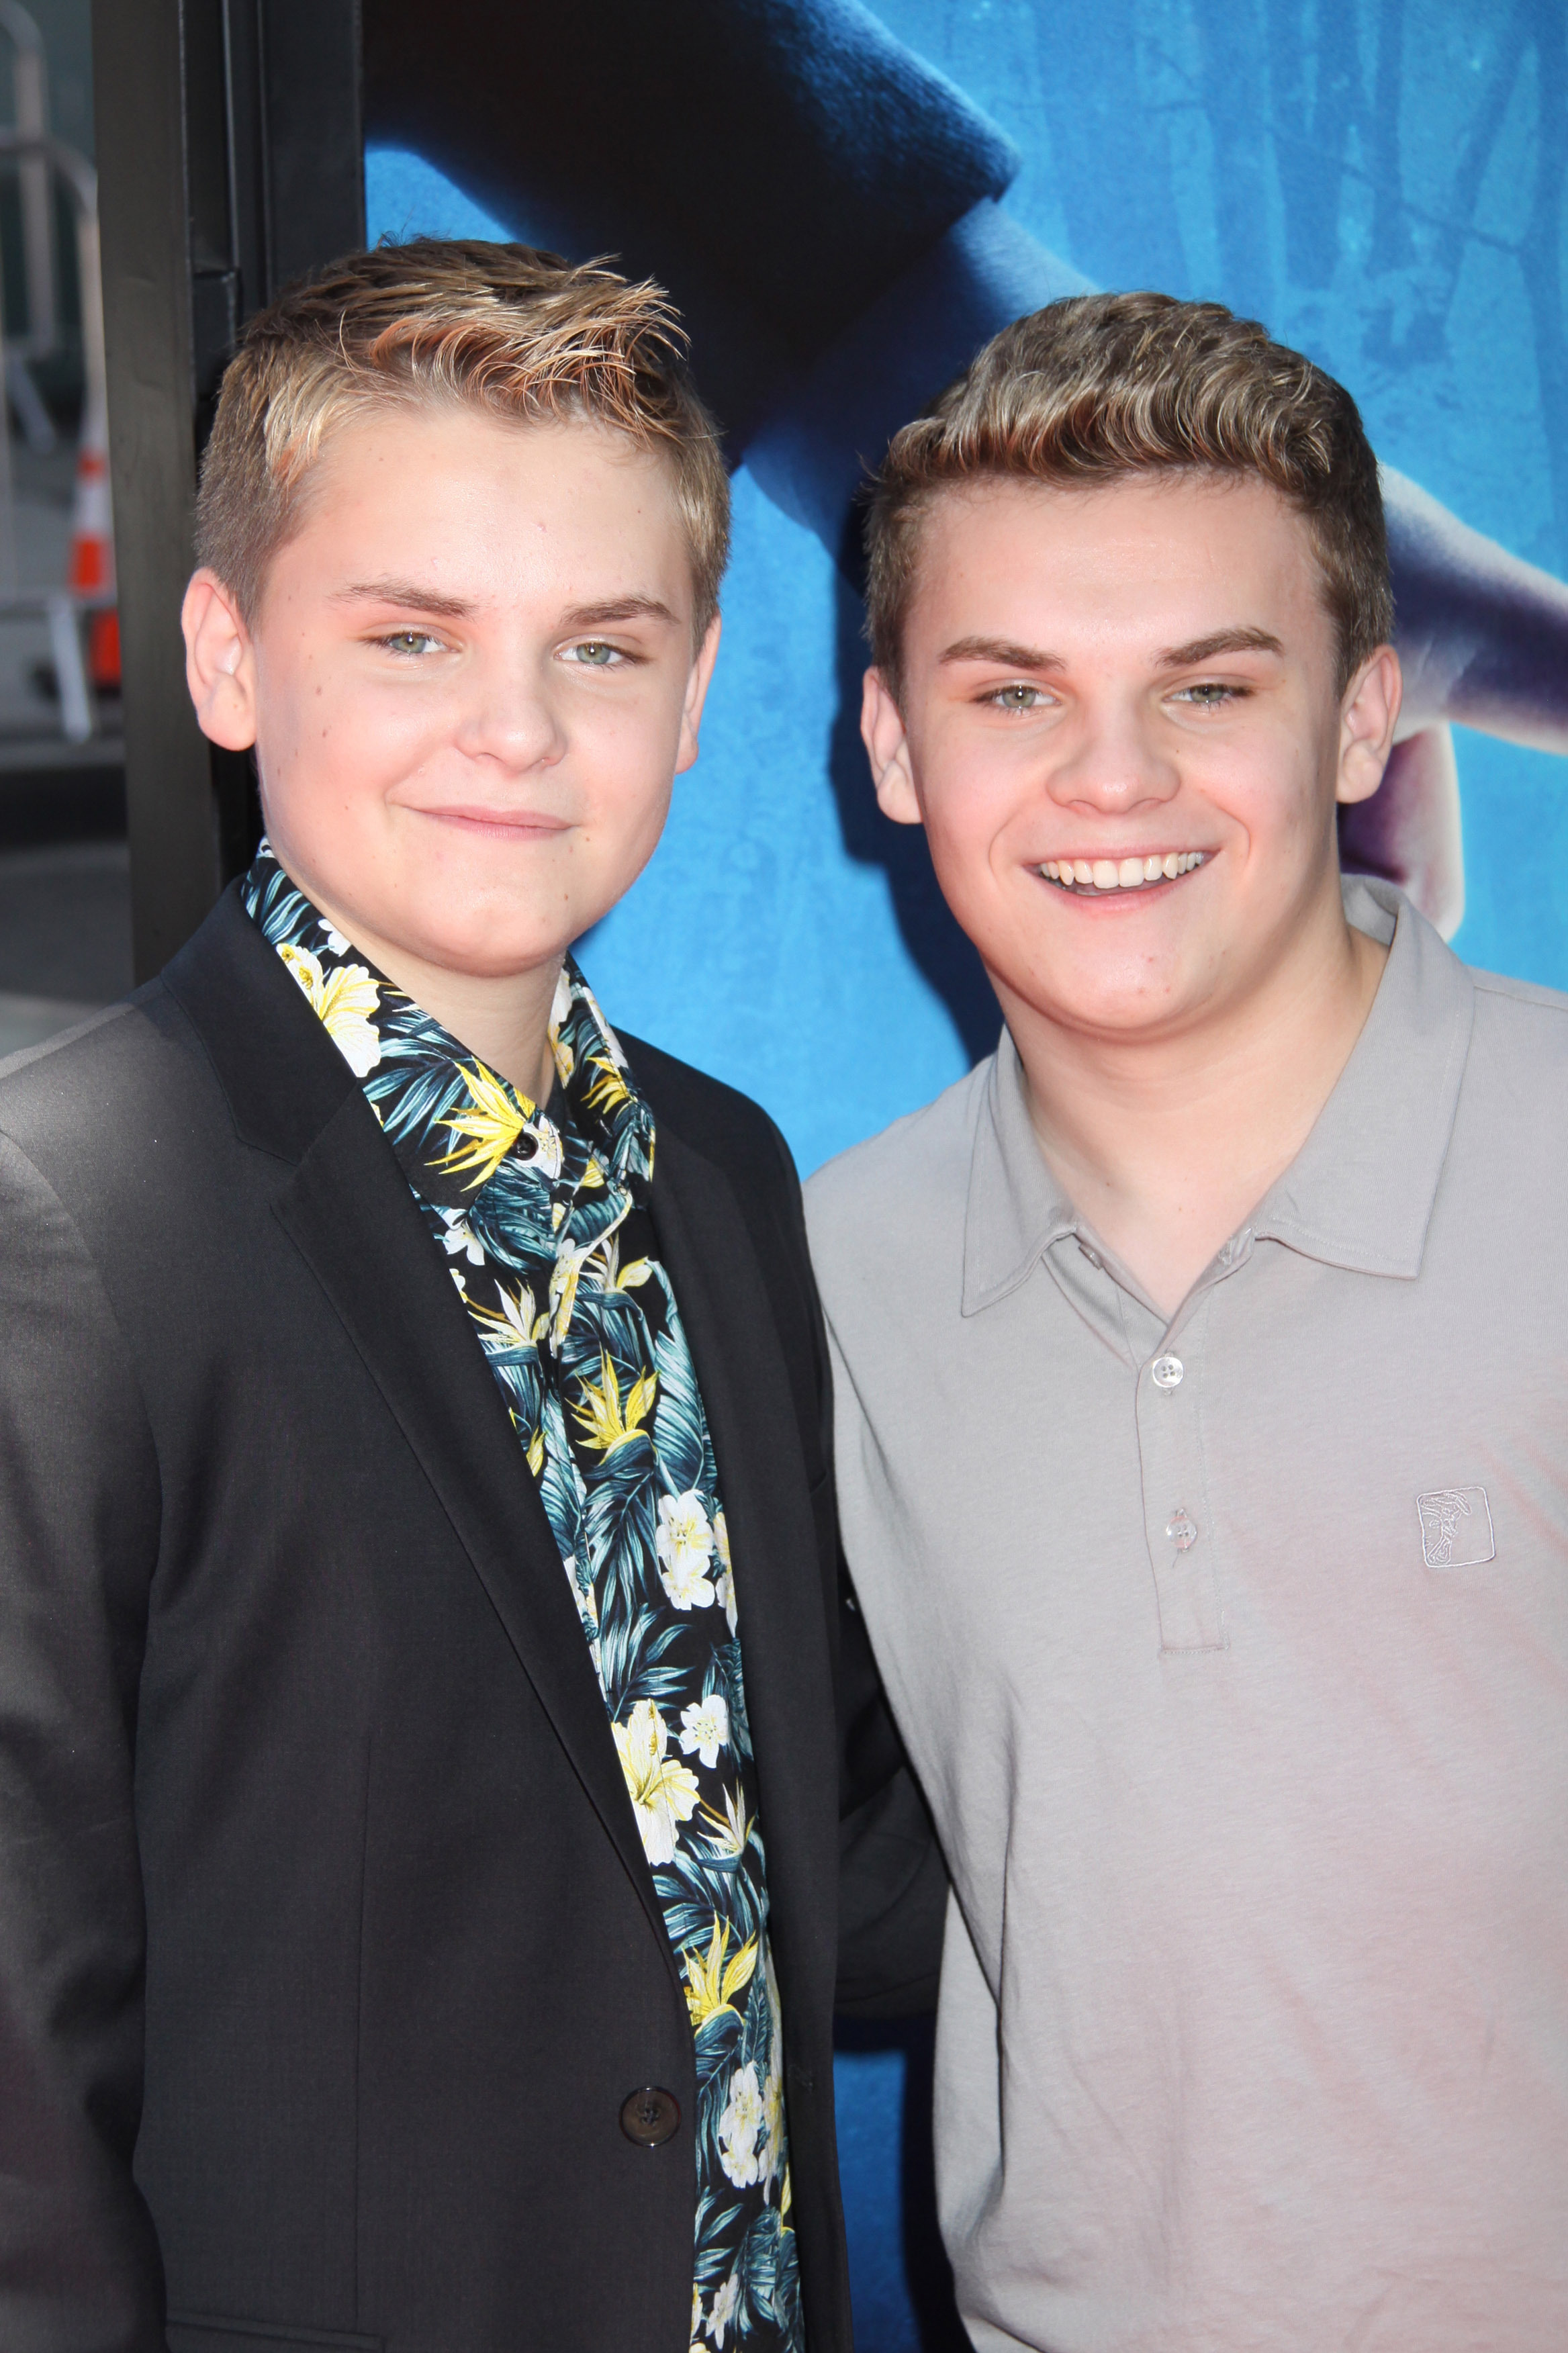 Reese Hartwig and his brother Ryan Hartwig at the Earth To Echo World Premiere during the LA Film Fest on June 14, 2014